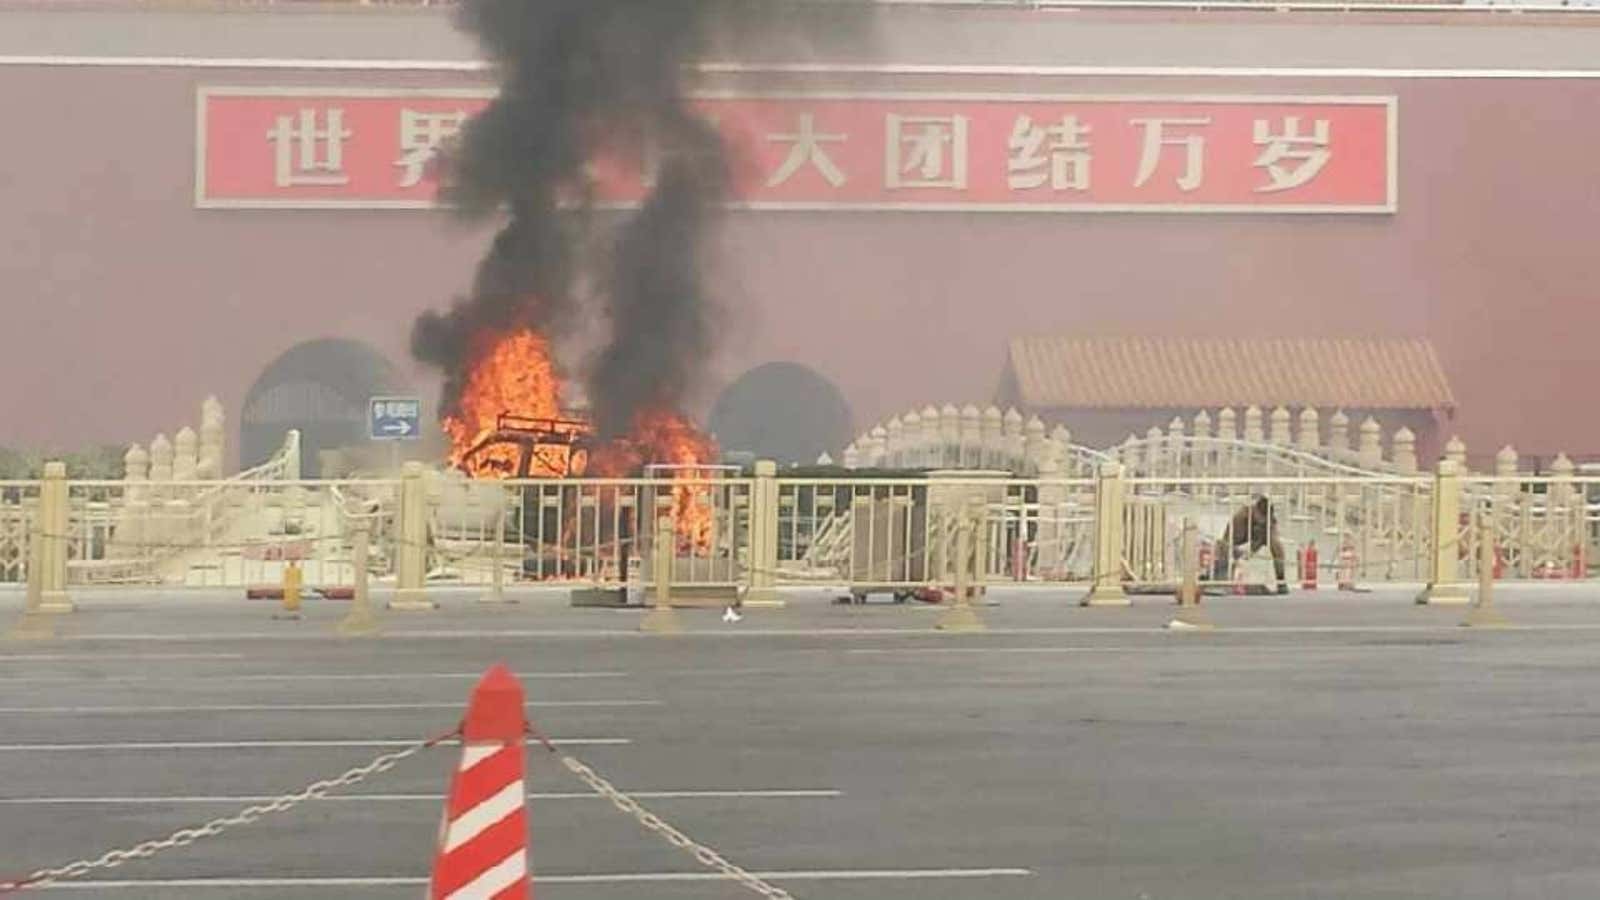 The vehicle in Tiananmen Square after the crash.